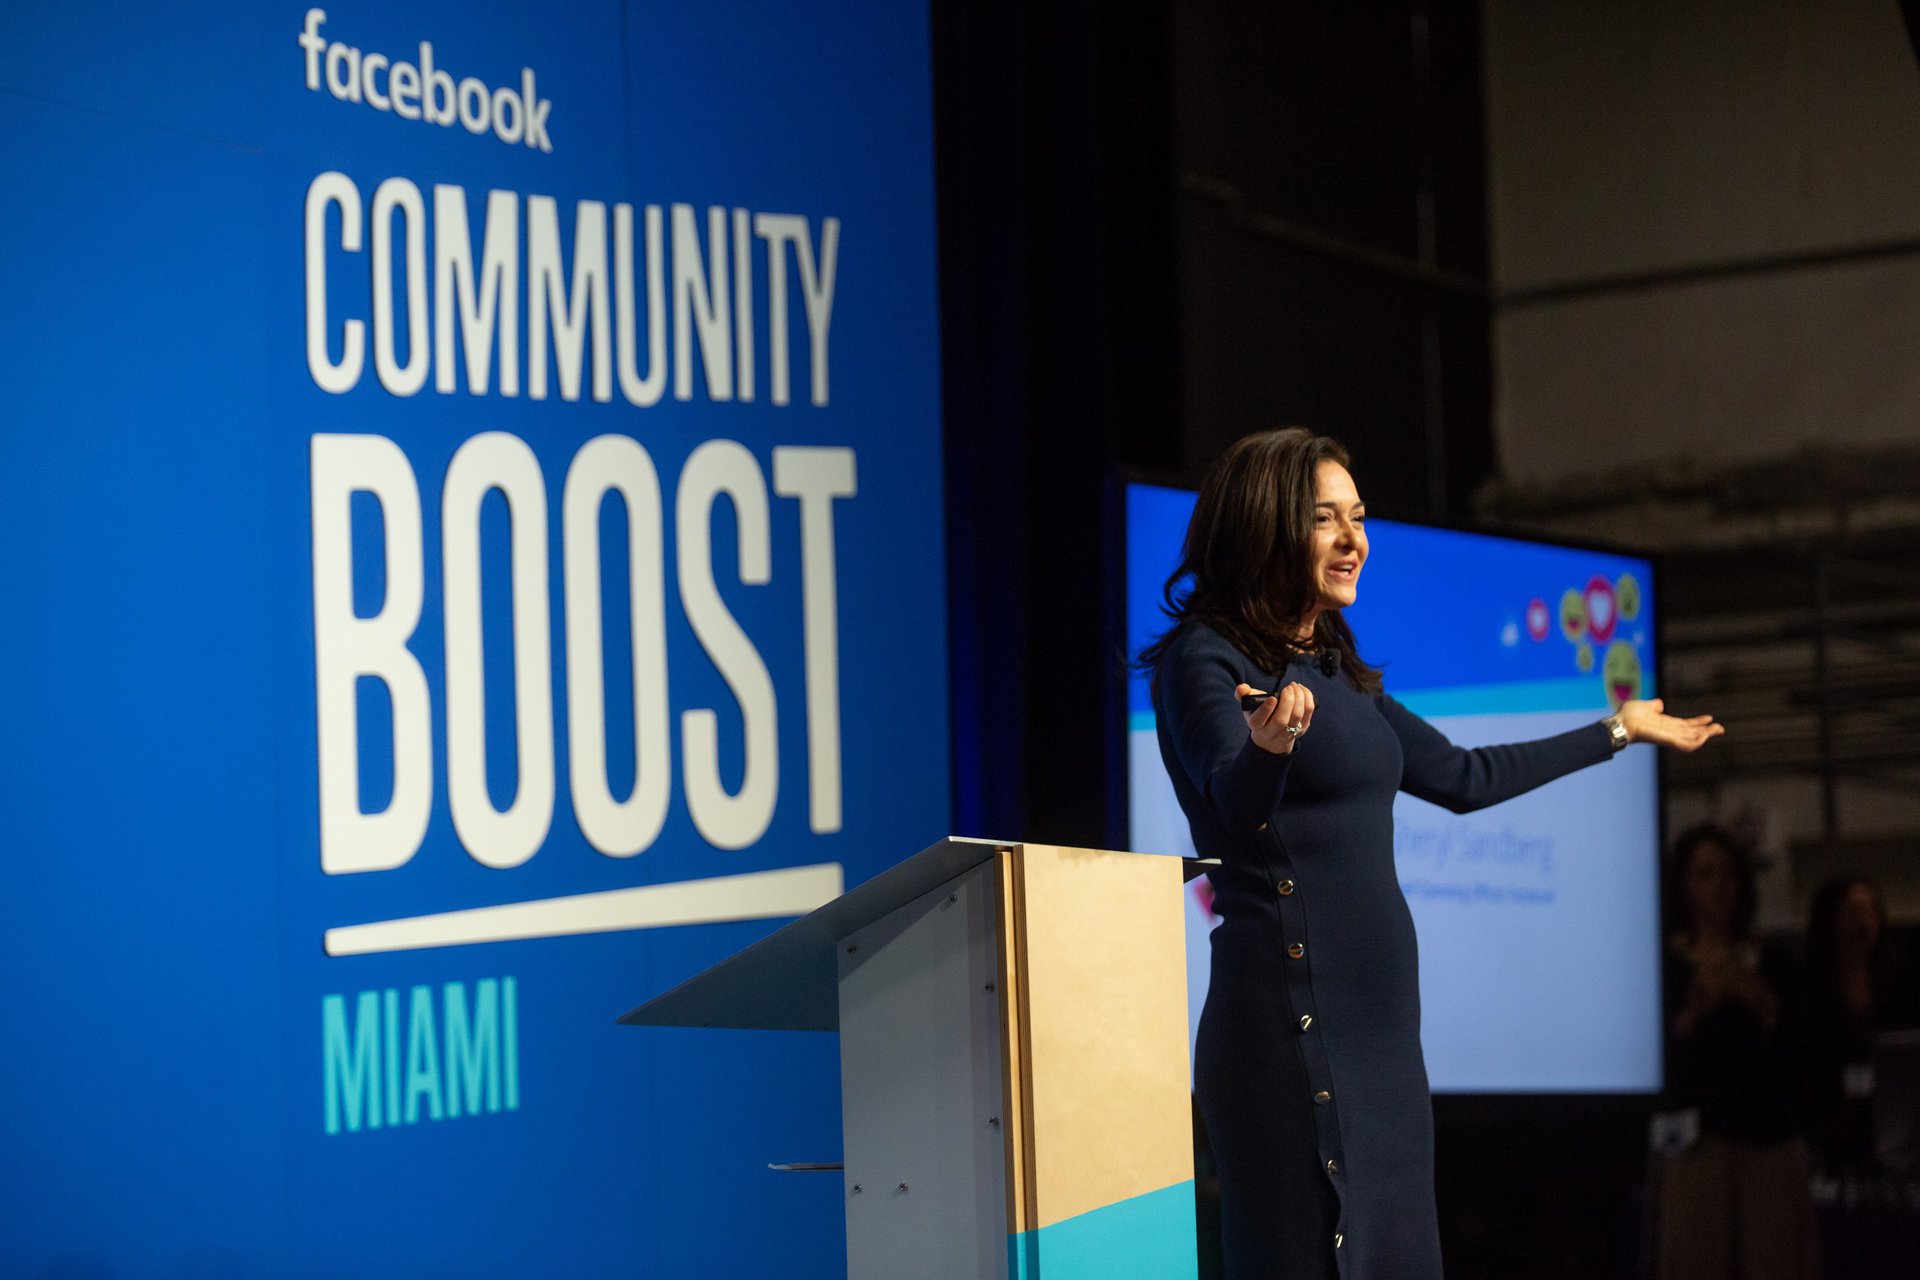 Sheryl Sandberg addresses the crowd in Miami at Facebook Community Boost.